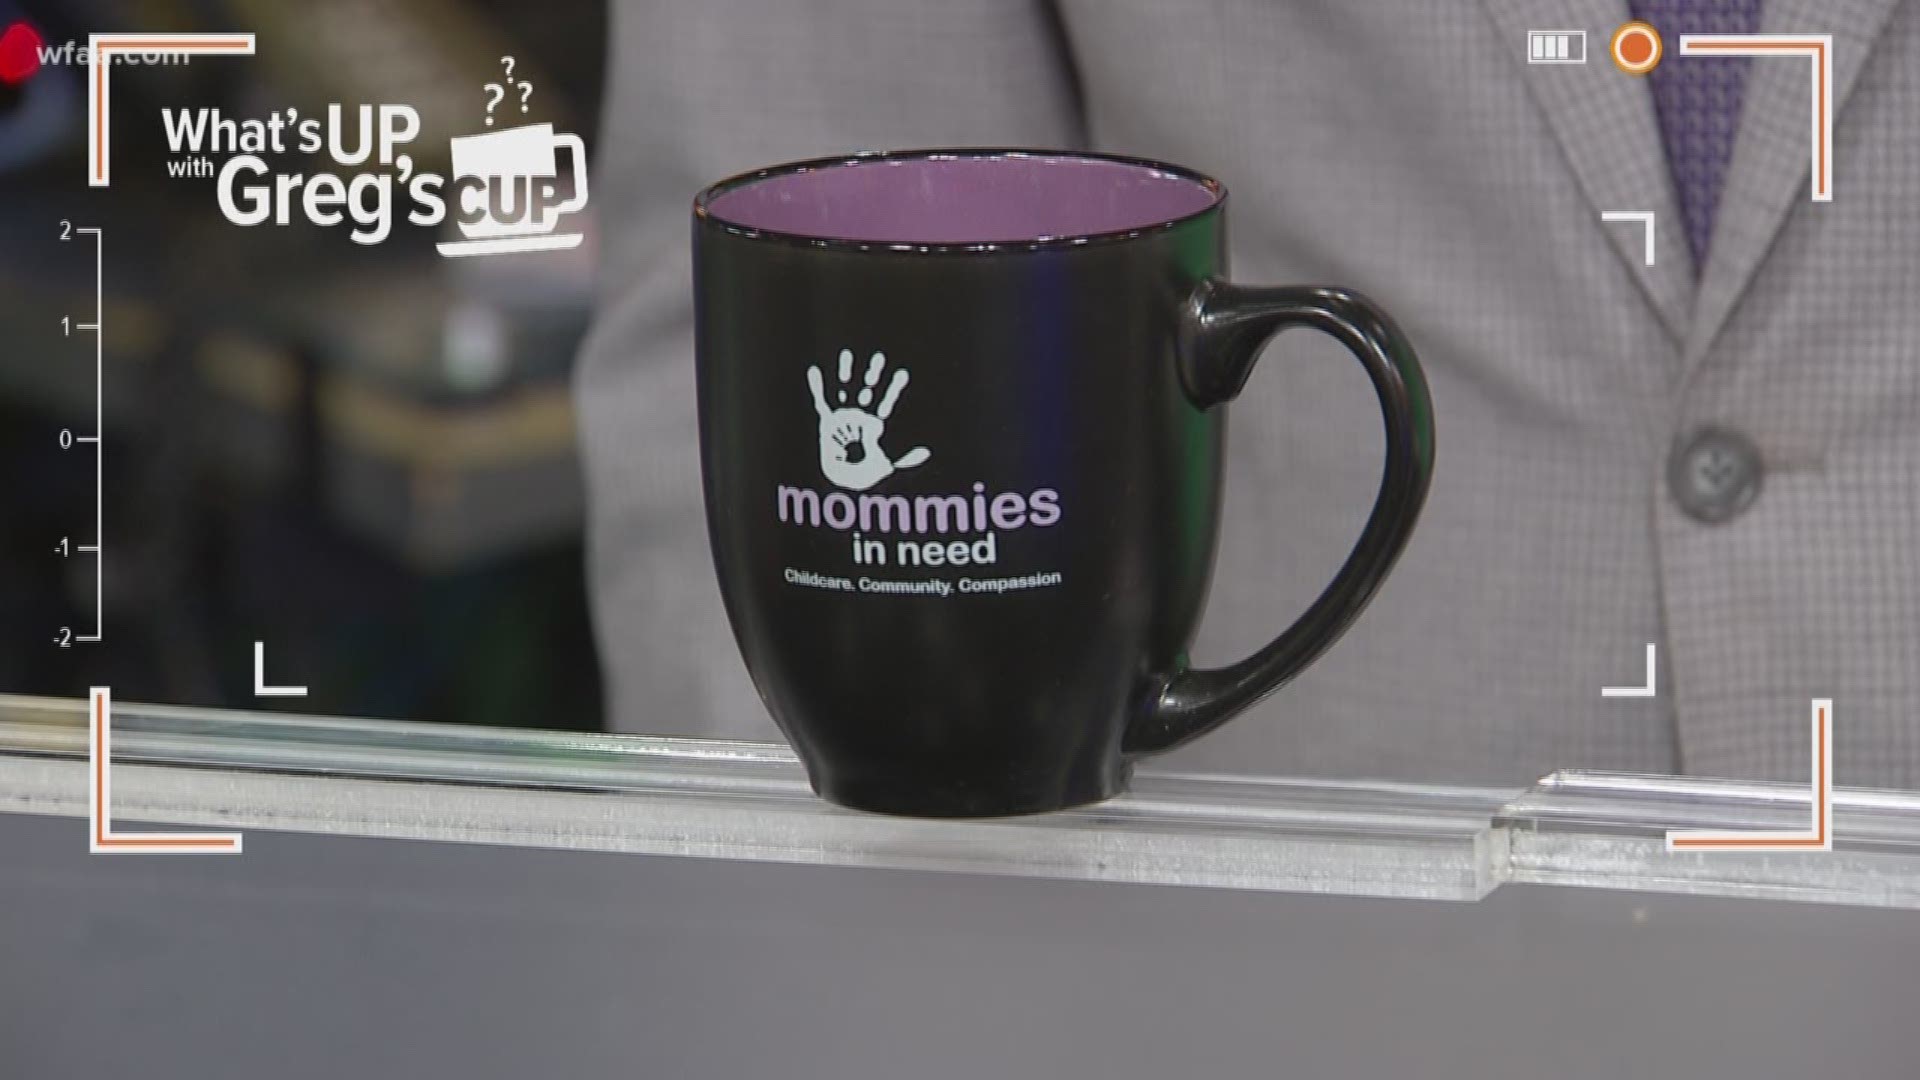 What's up with Greg Field's cup? Mommies in Need